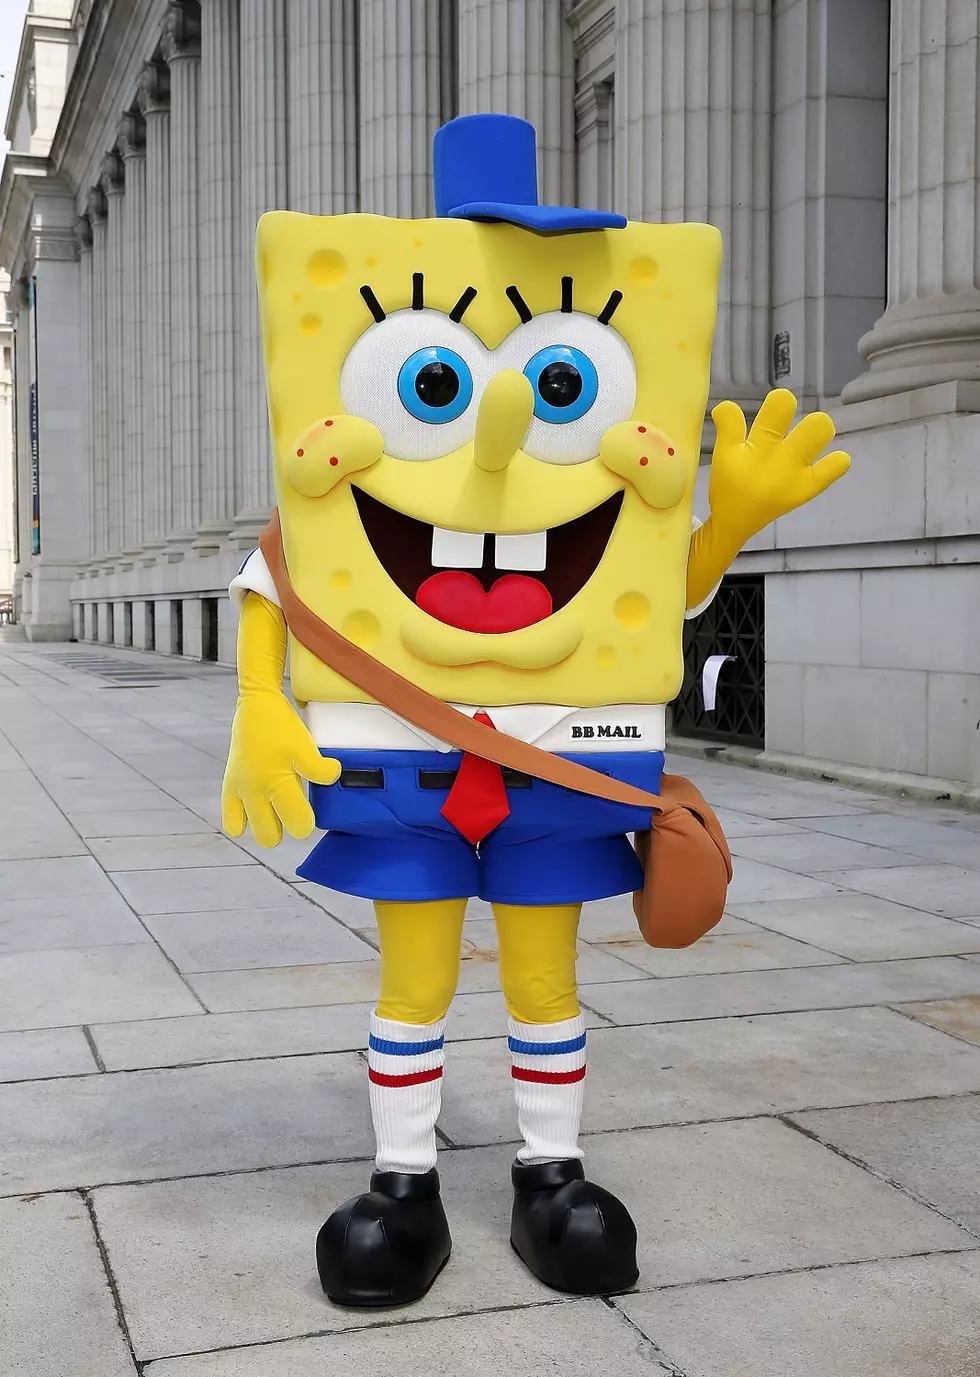 The Sixers' G-League team is wearing Spongebob uniforms for Nickelodeon  night 